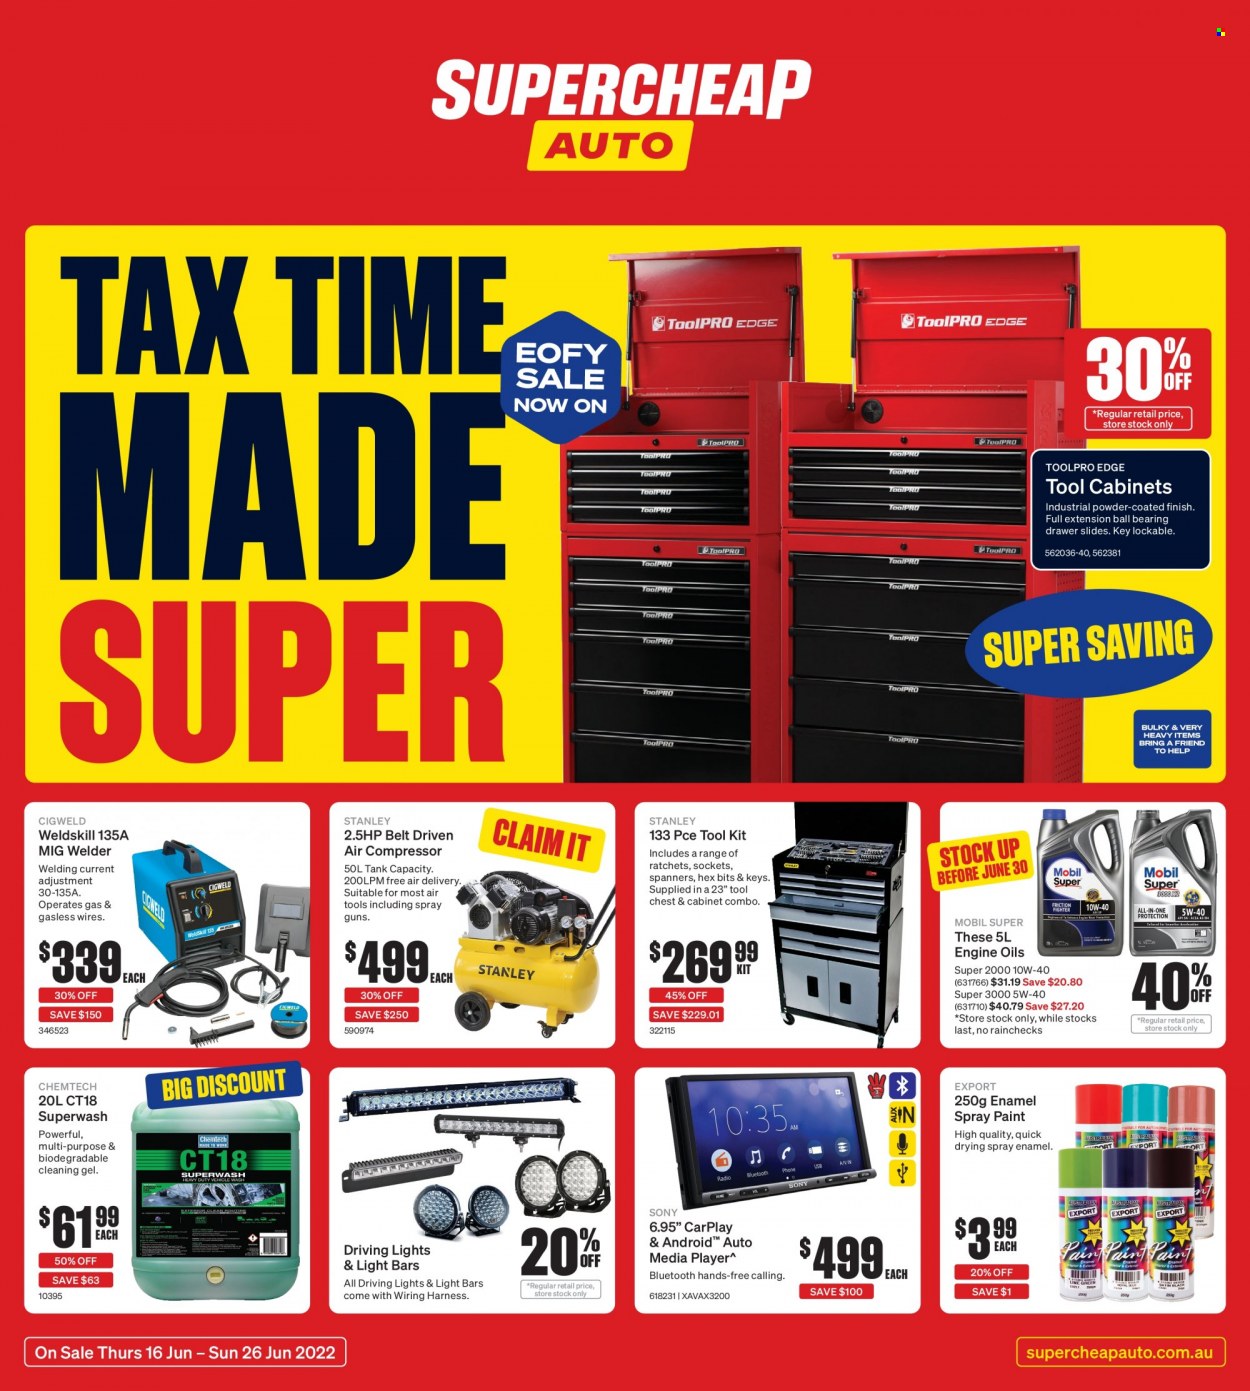 thumbnail - Supercheap Auto Catalogue - 16 Jun 2022 - 26 Jun 2022 - Sales products - Sony, media player, belt, Stanley, tool set, tool chest, air compressor, cabinet, inverter welder, tool cabinets, welder, driving lights, wiring harness, spray paint, Mobil. Page 1.